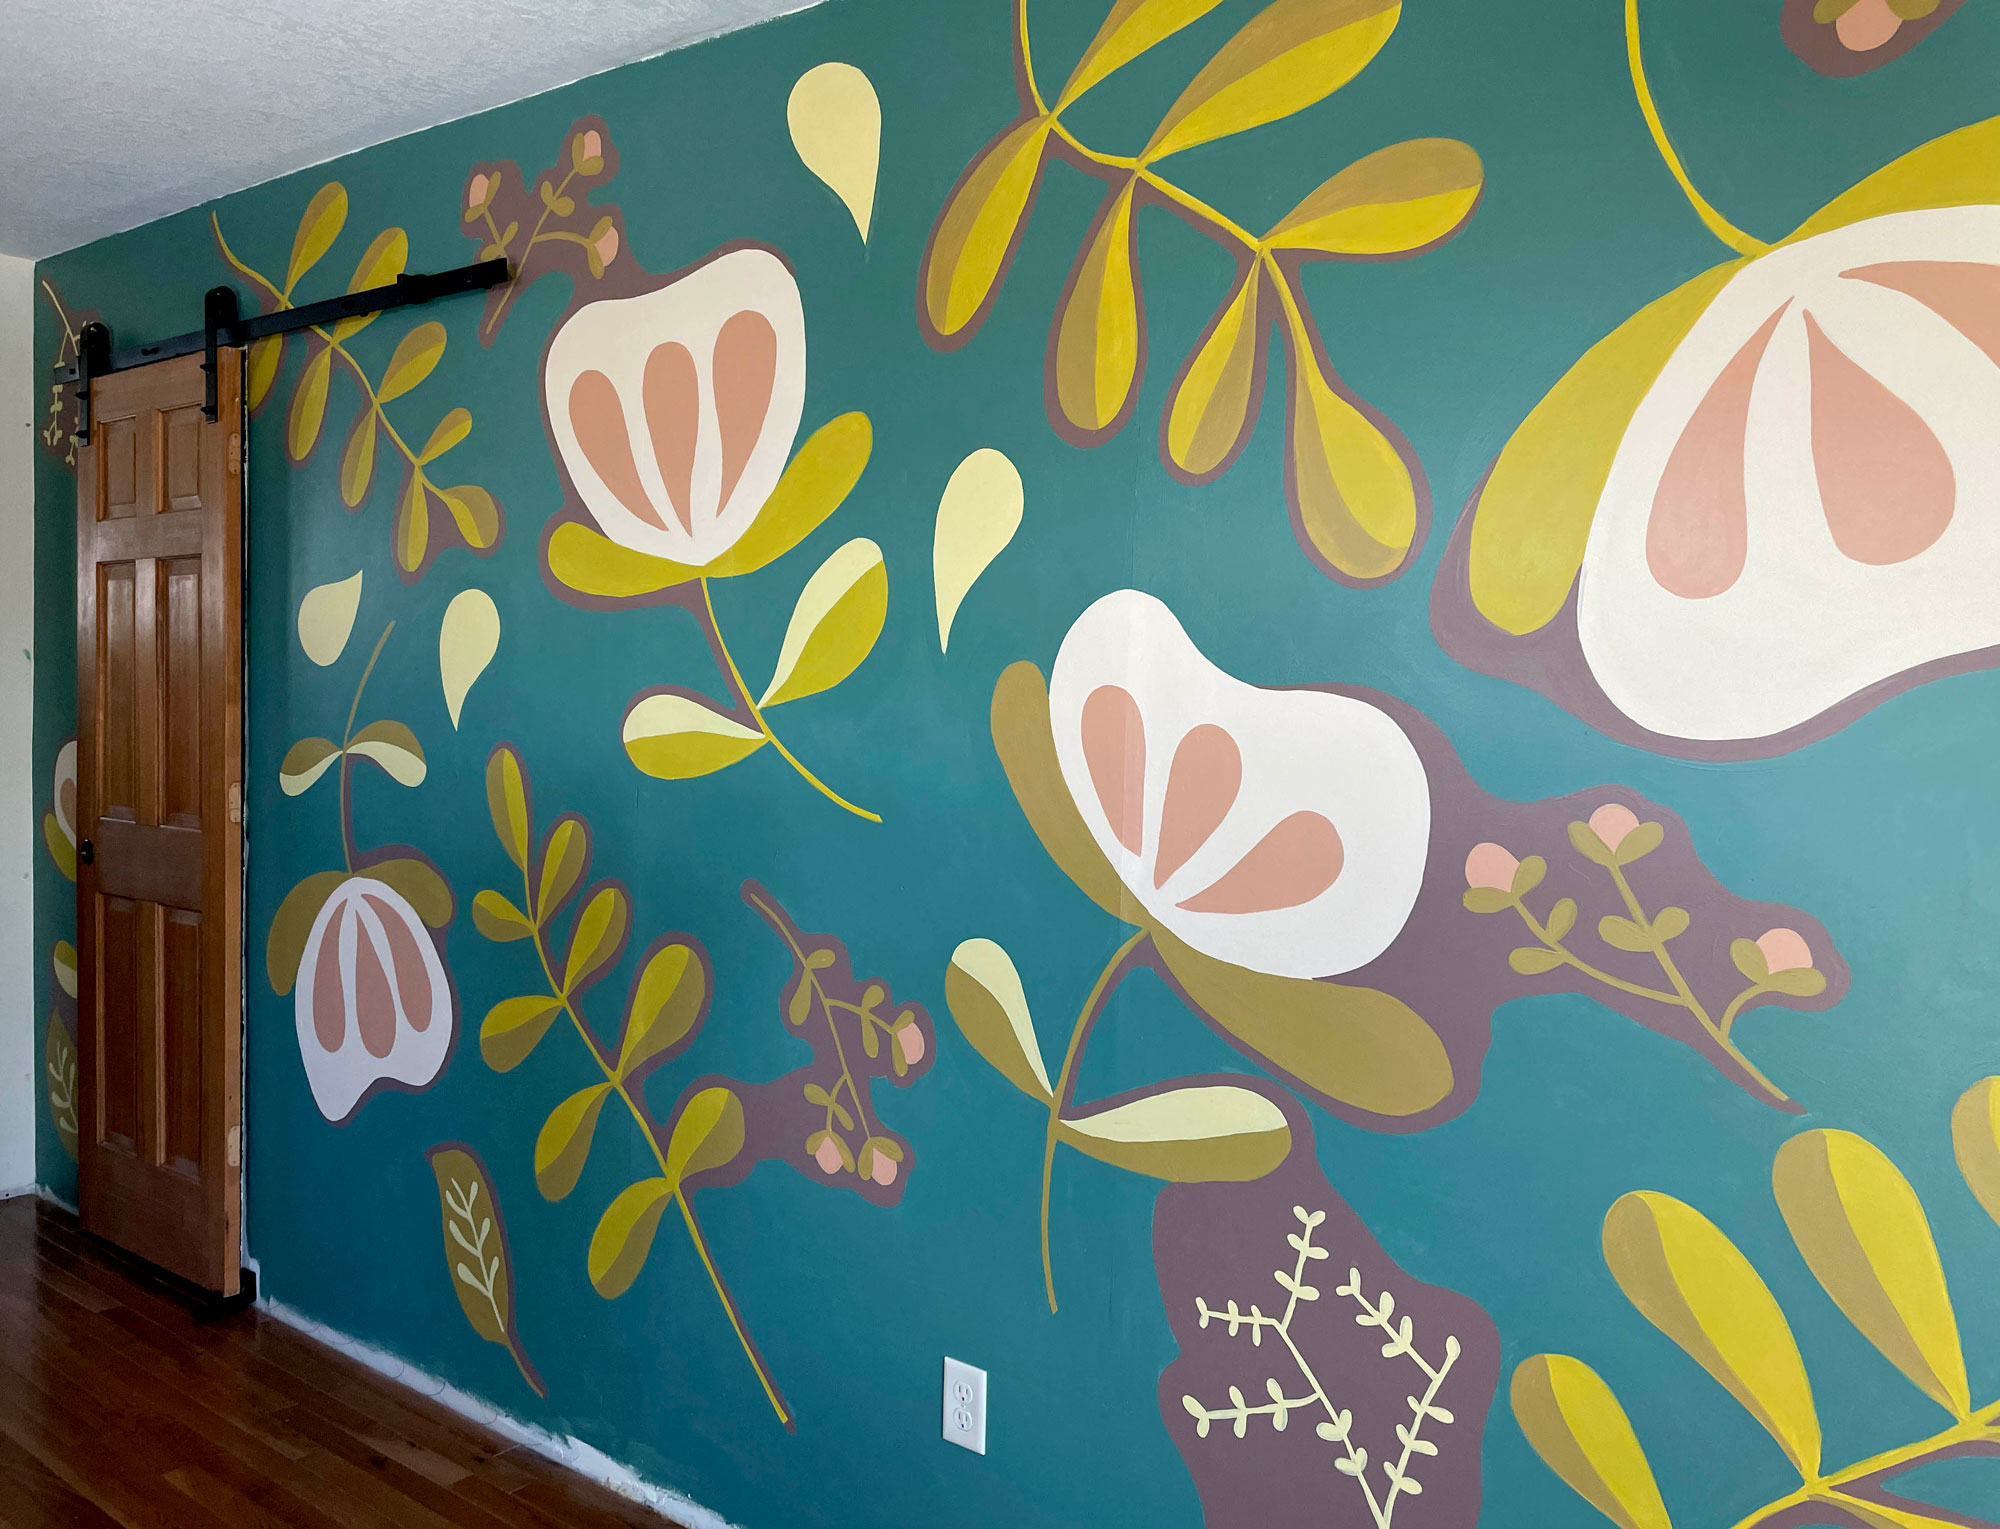 Floral wall mural, How to paint a floral mural, Playroom mural, Playroom floral mural, Floral mural how to, Home mural tips, Mural DIY